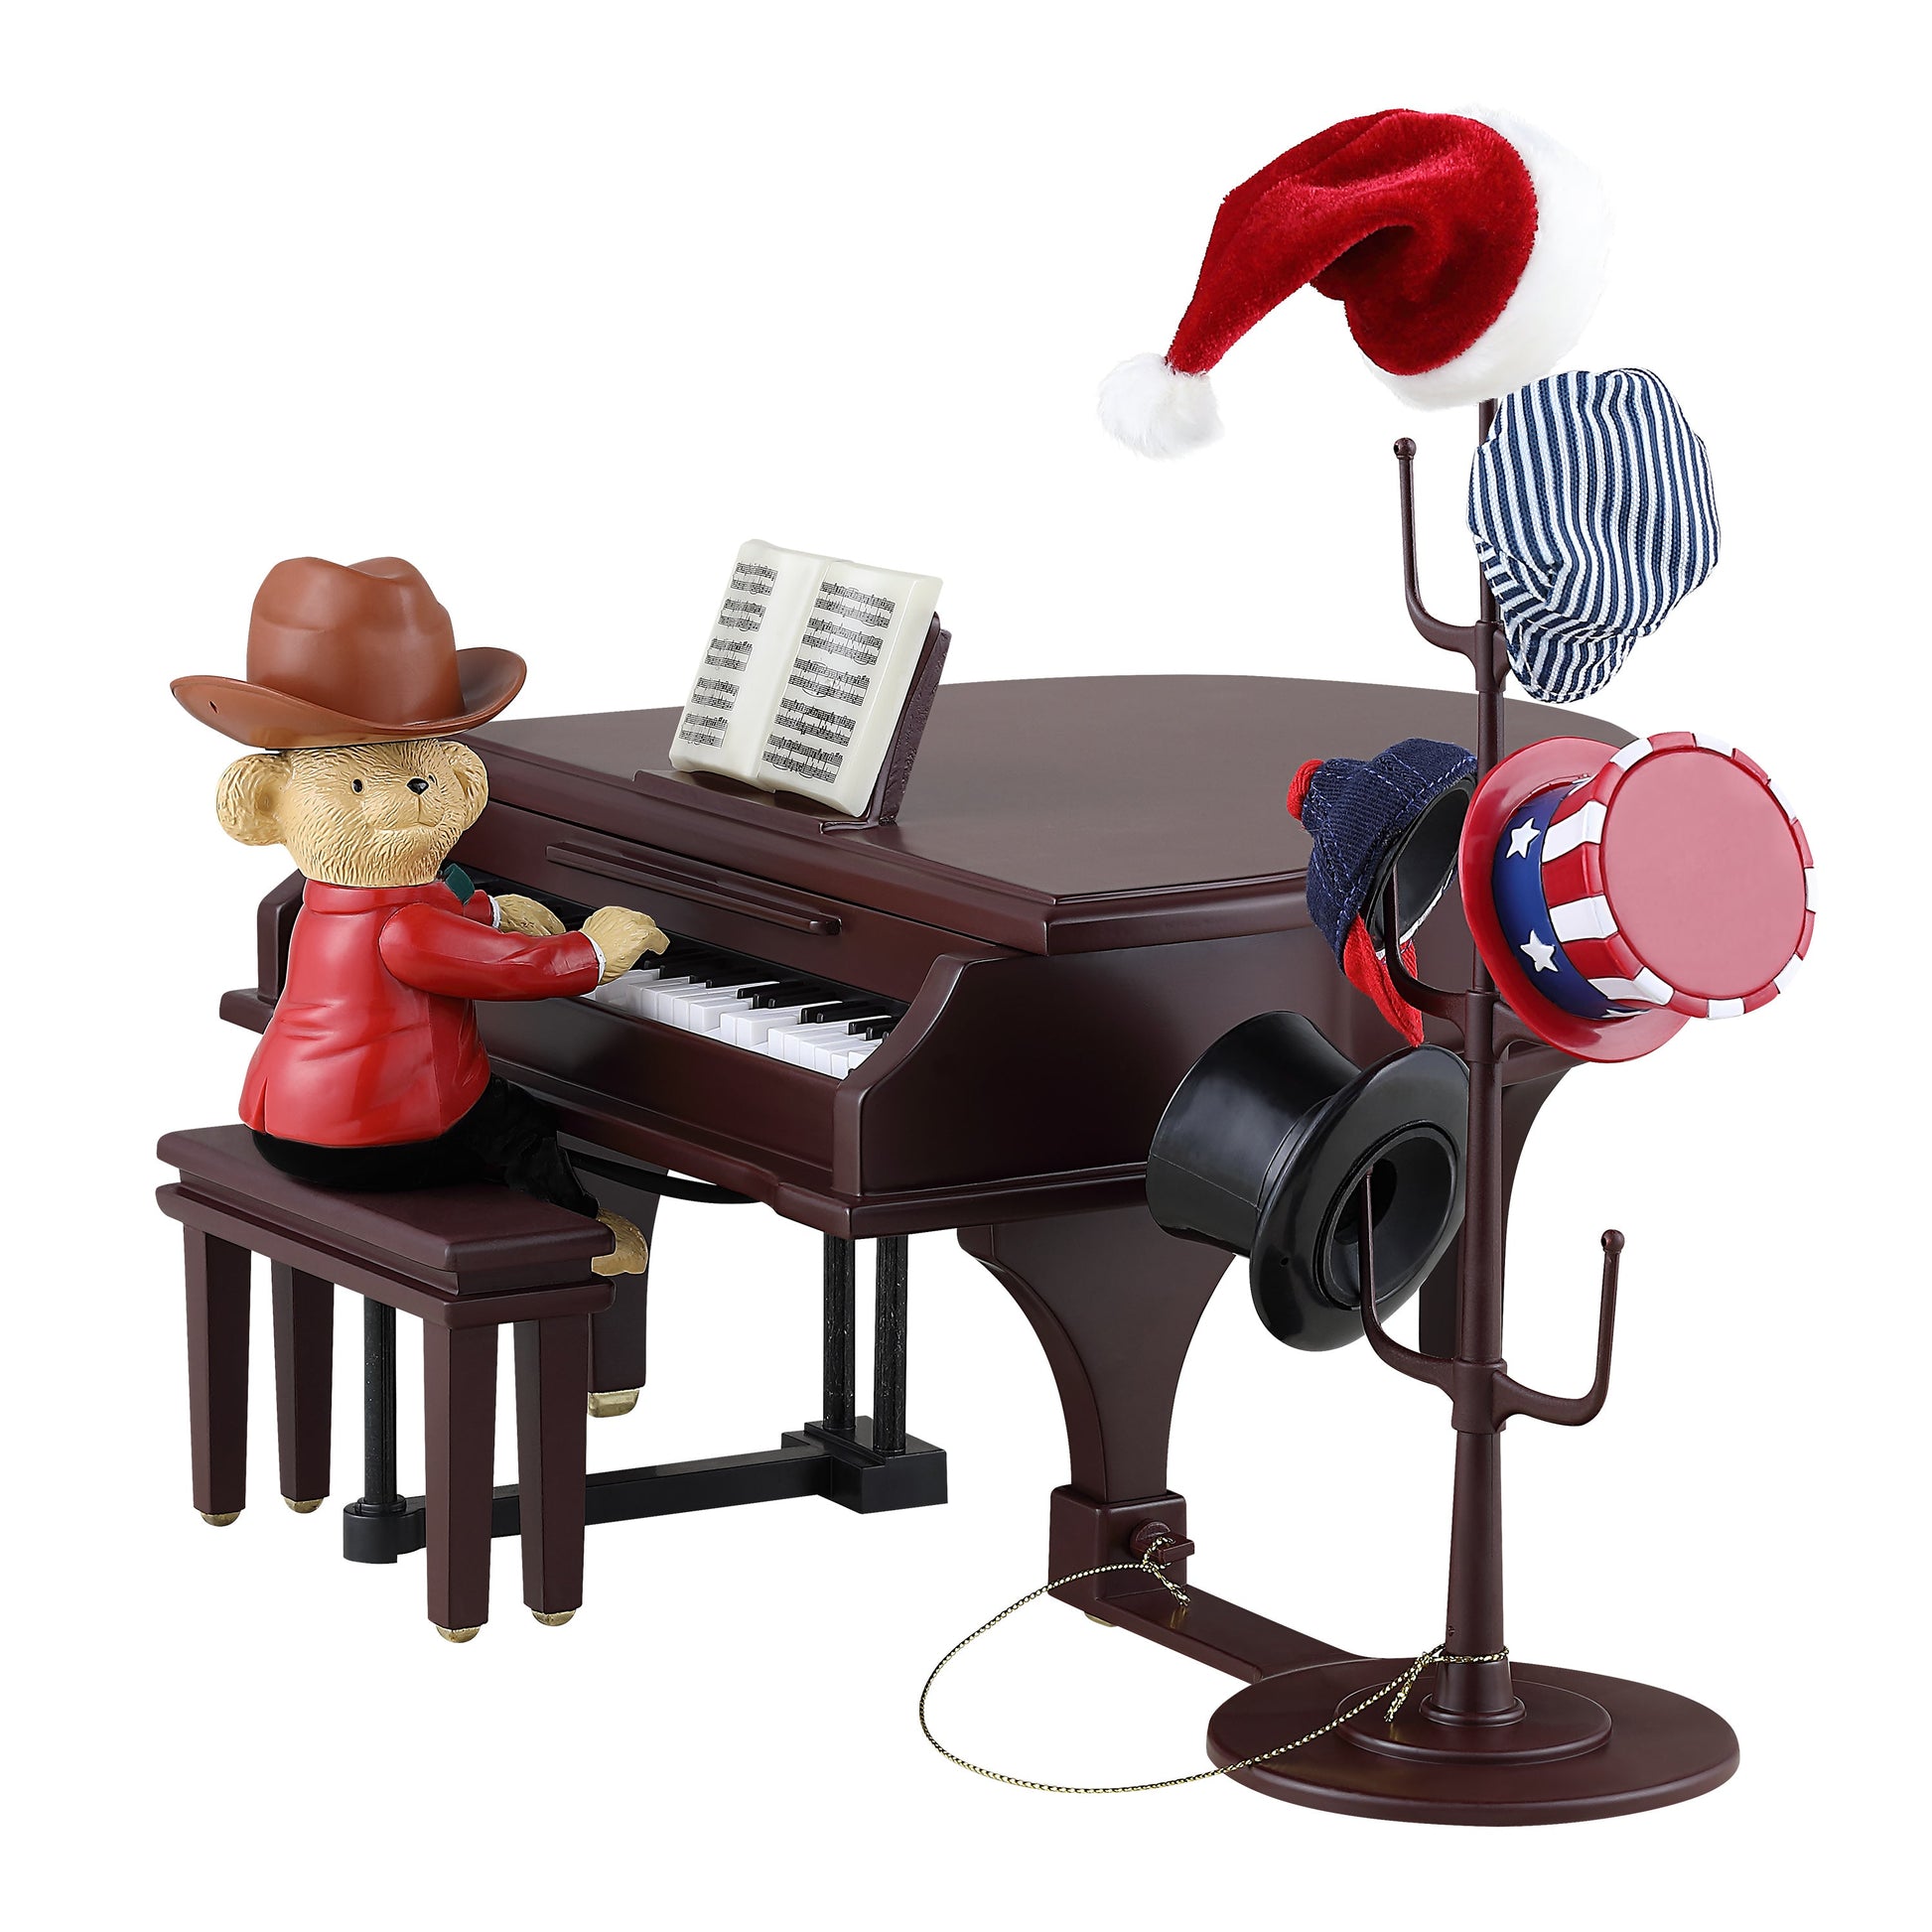 90th Anniversary Collection - Animated & Musical Teddy Takes Requests - Mr. Christmas